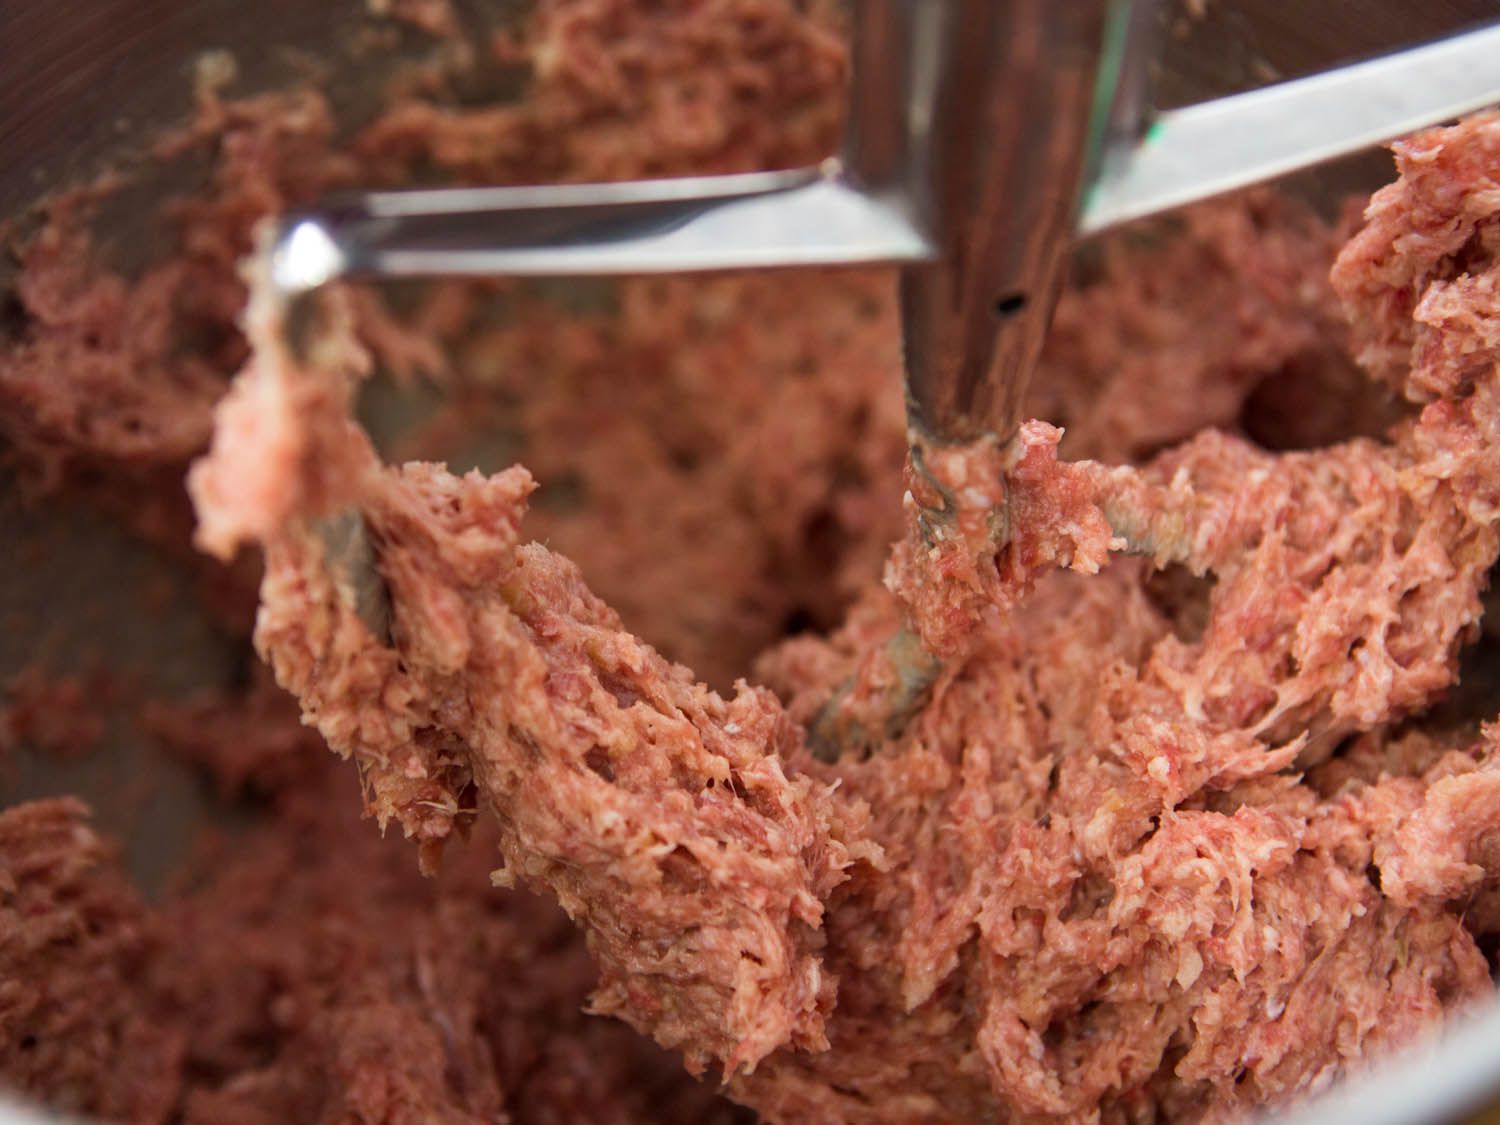 Meat mixing in a stand mixer for Swedish meatballs.